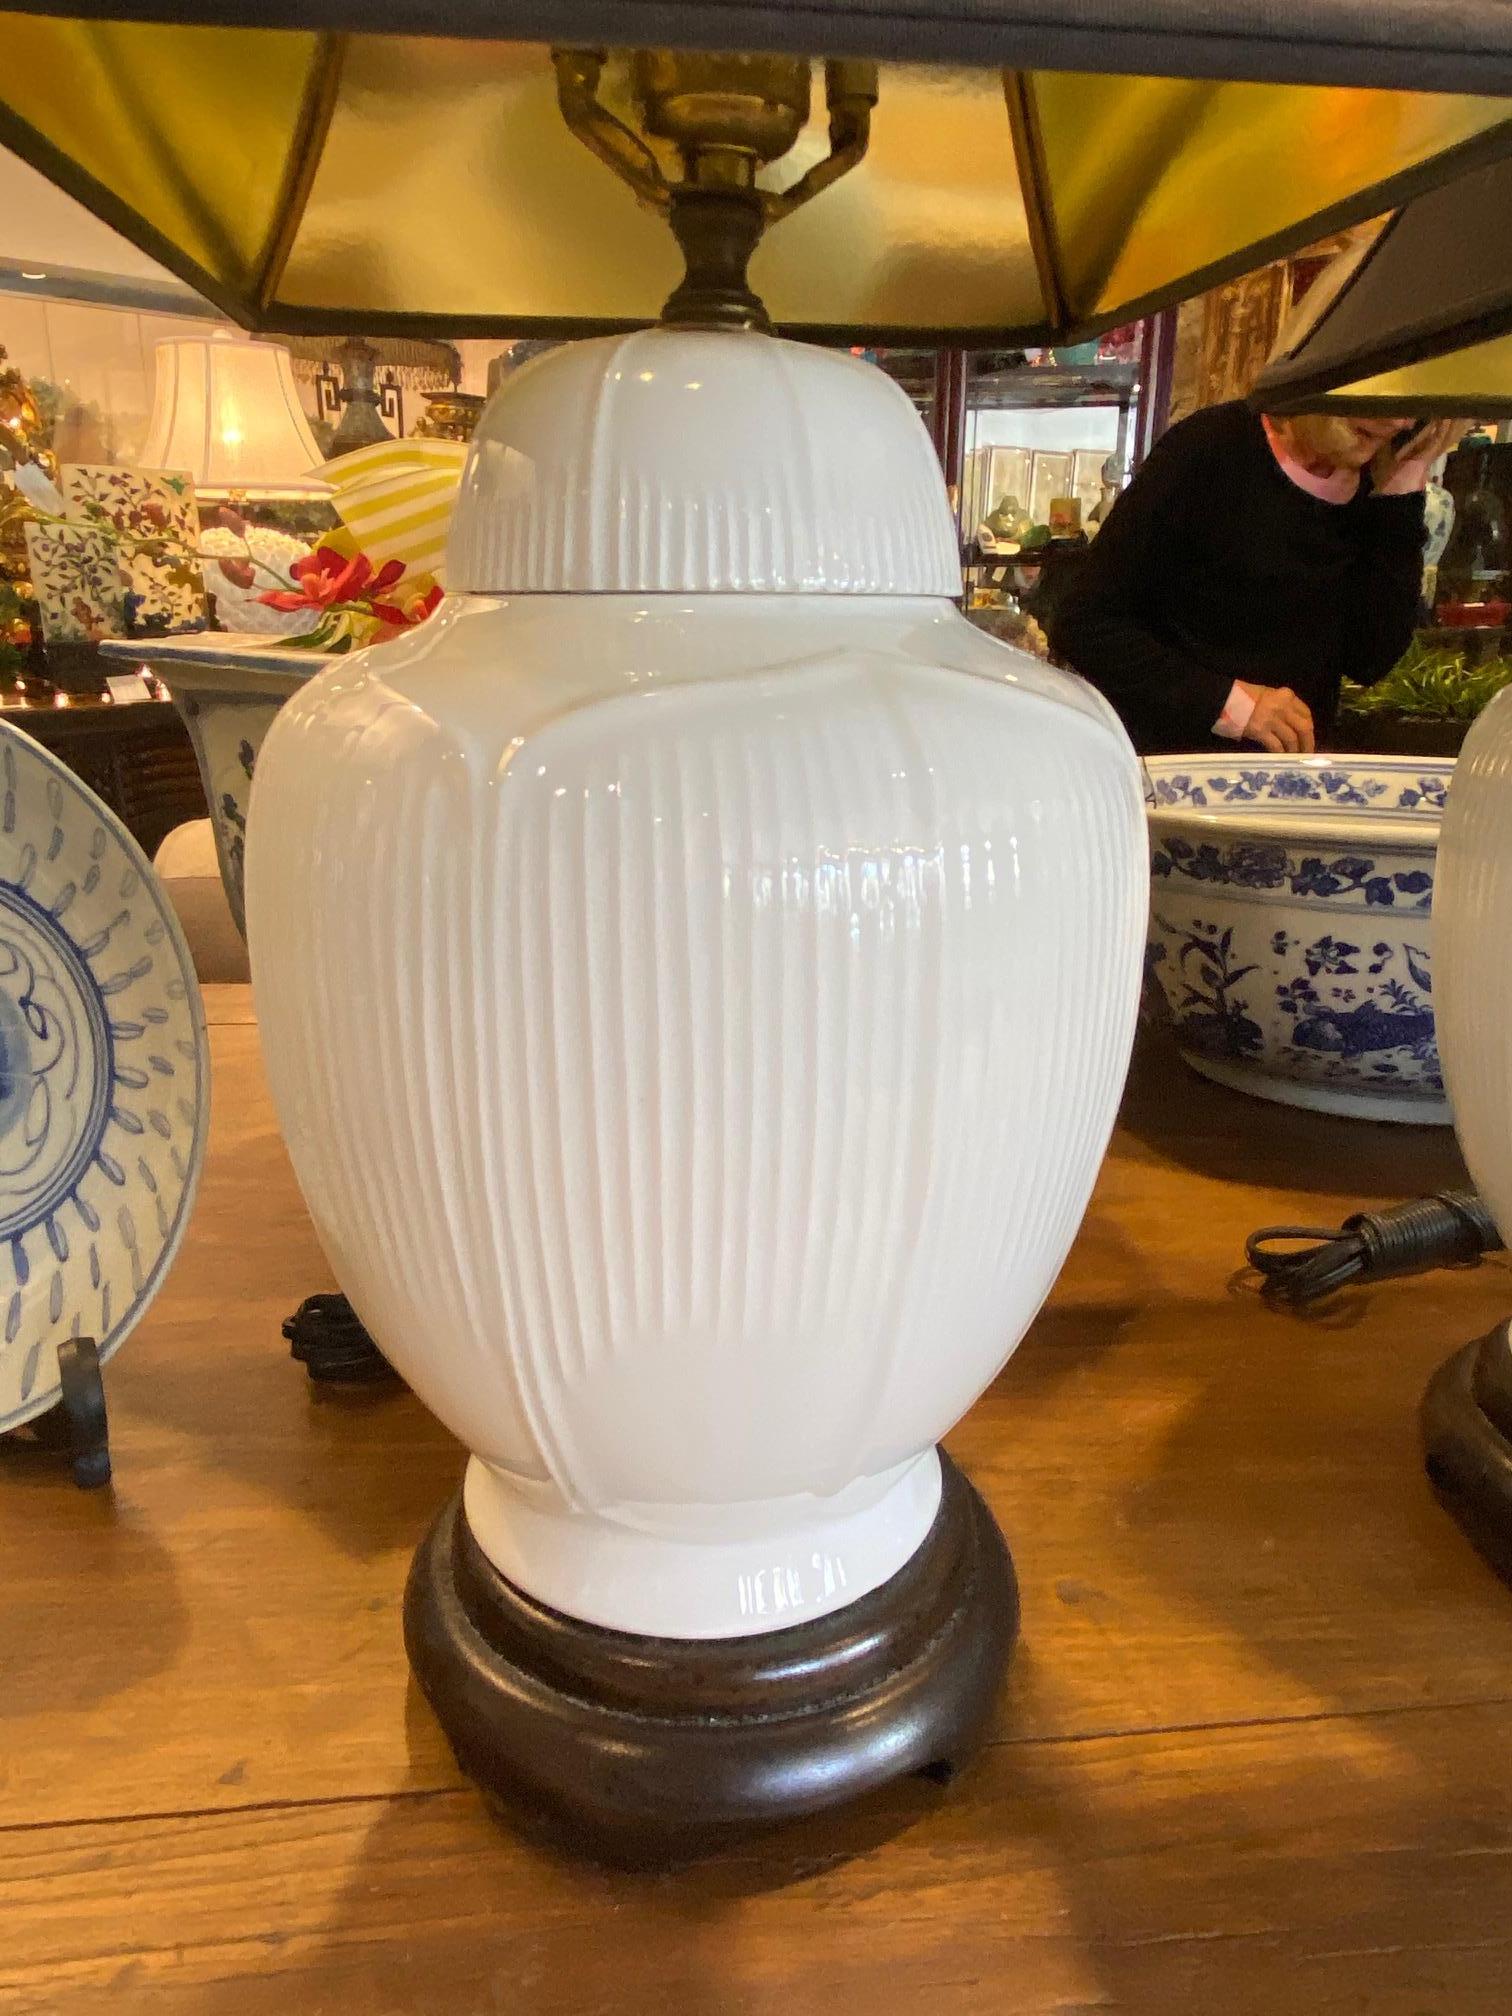 This pair of Chinese Blanc de Chine white porcelain (having a touch of slight green) ginger jar lamps molded base design with lotus leaves converted into lamps, porcelain, brass and wood bases finals having birds and tree branches circa 1960s with